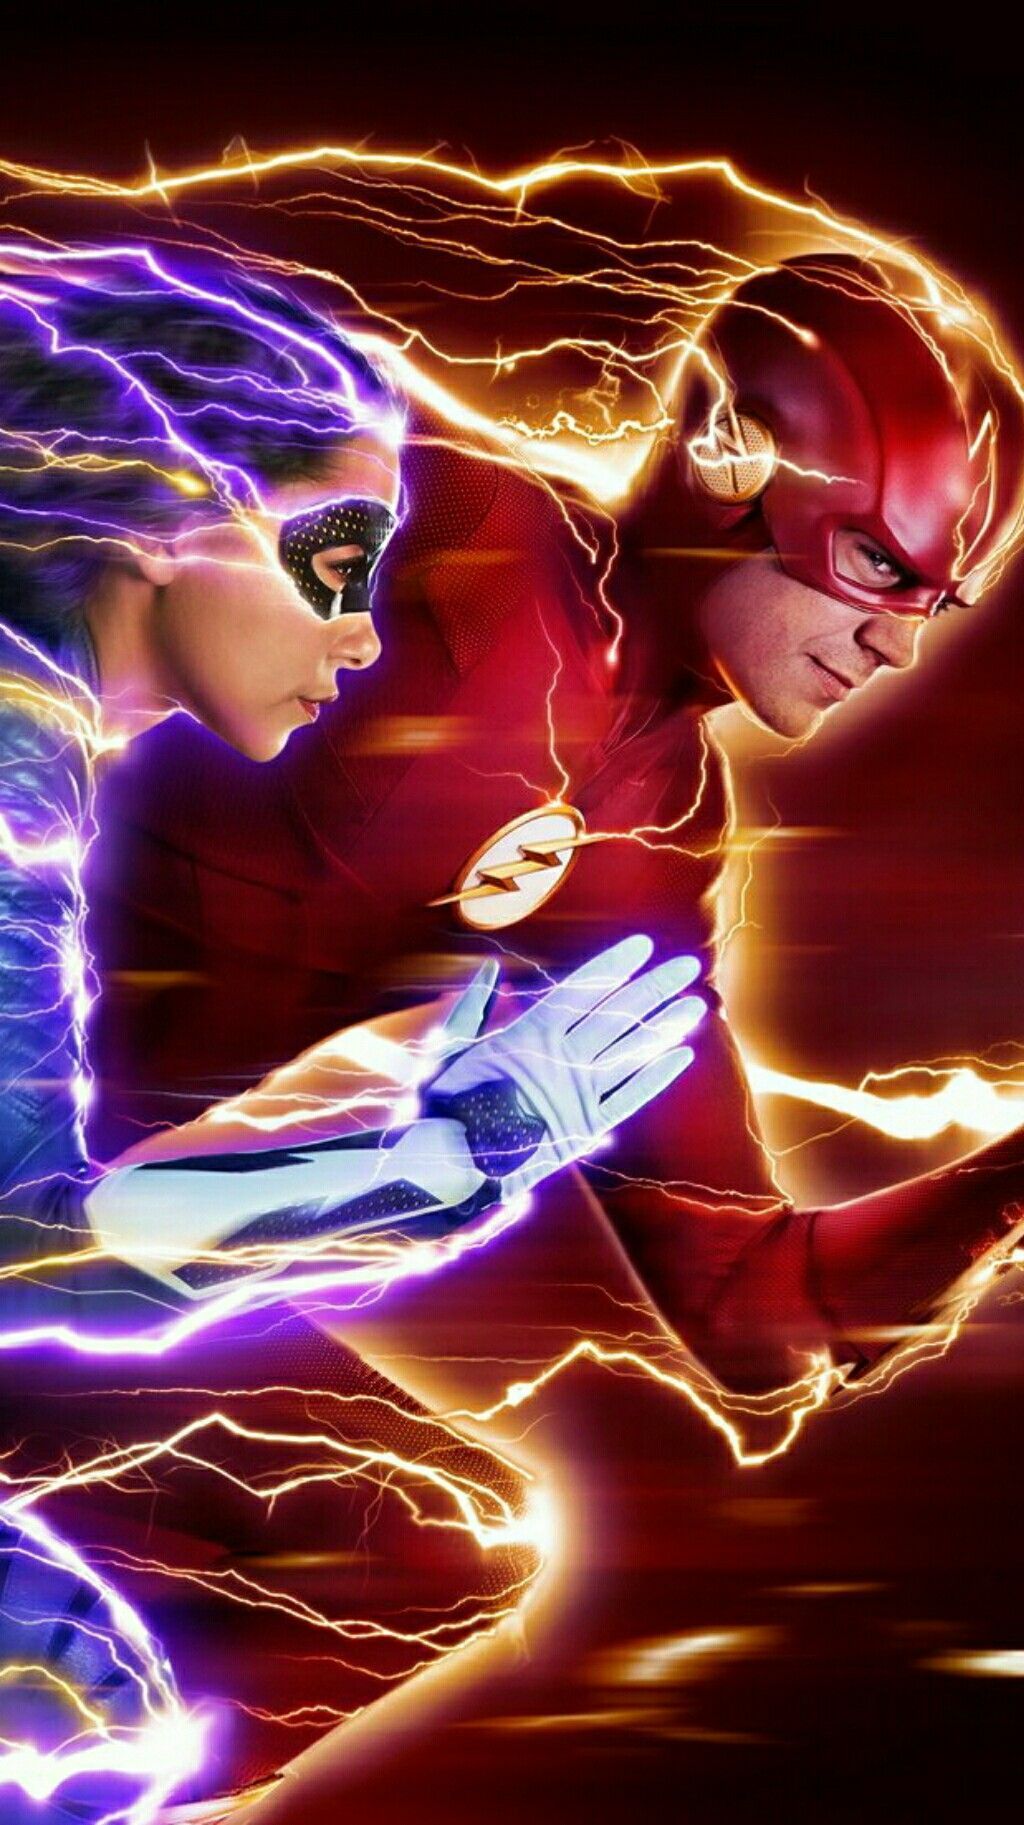 Well DC fans there you have it the fastest woman alive. The flash poster, Flash wallpaper, Flash characters